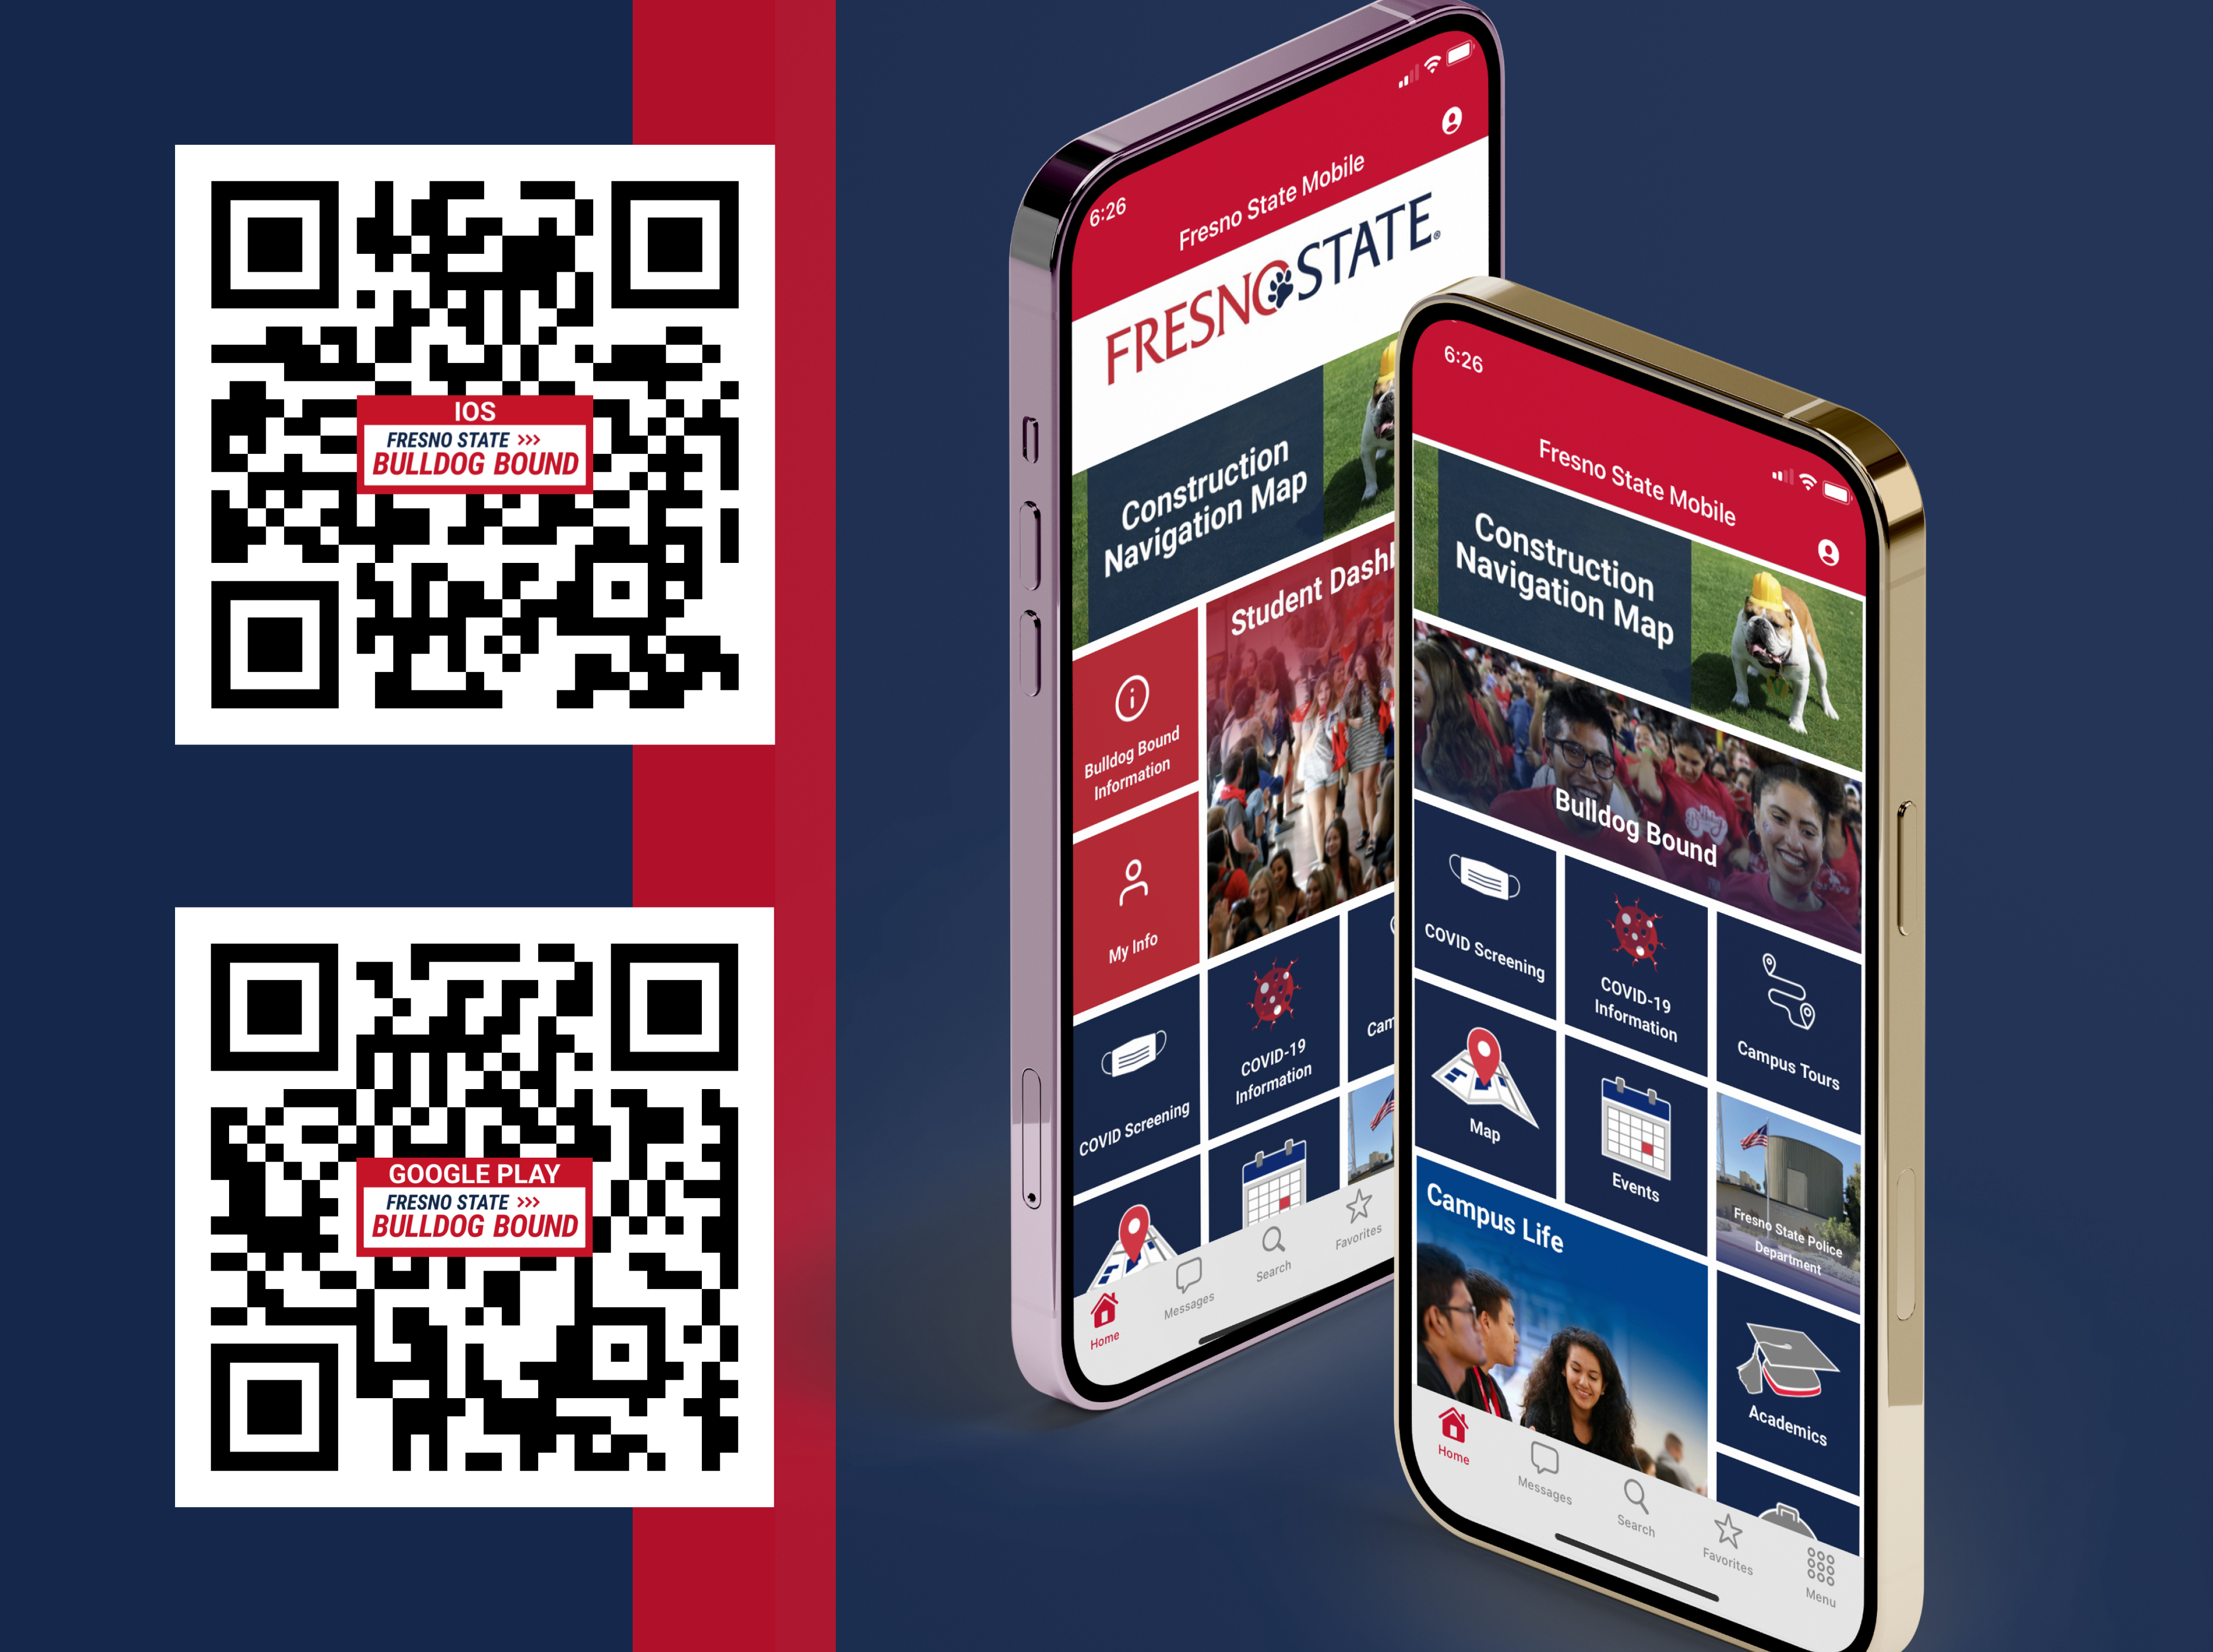 mobile app and 2 qr codes for downloading the app